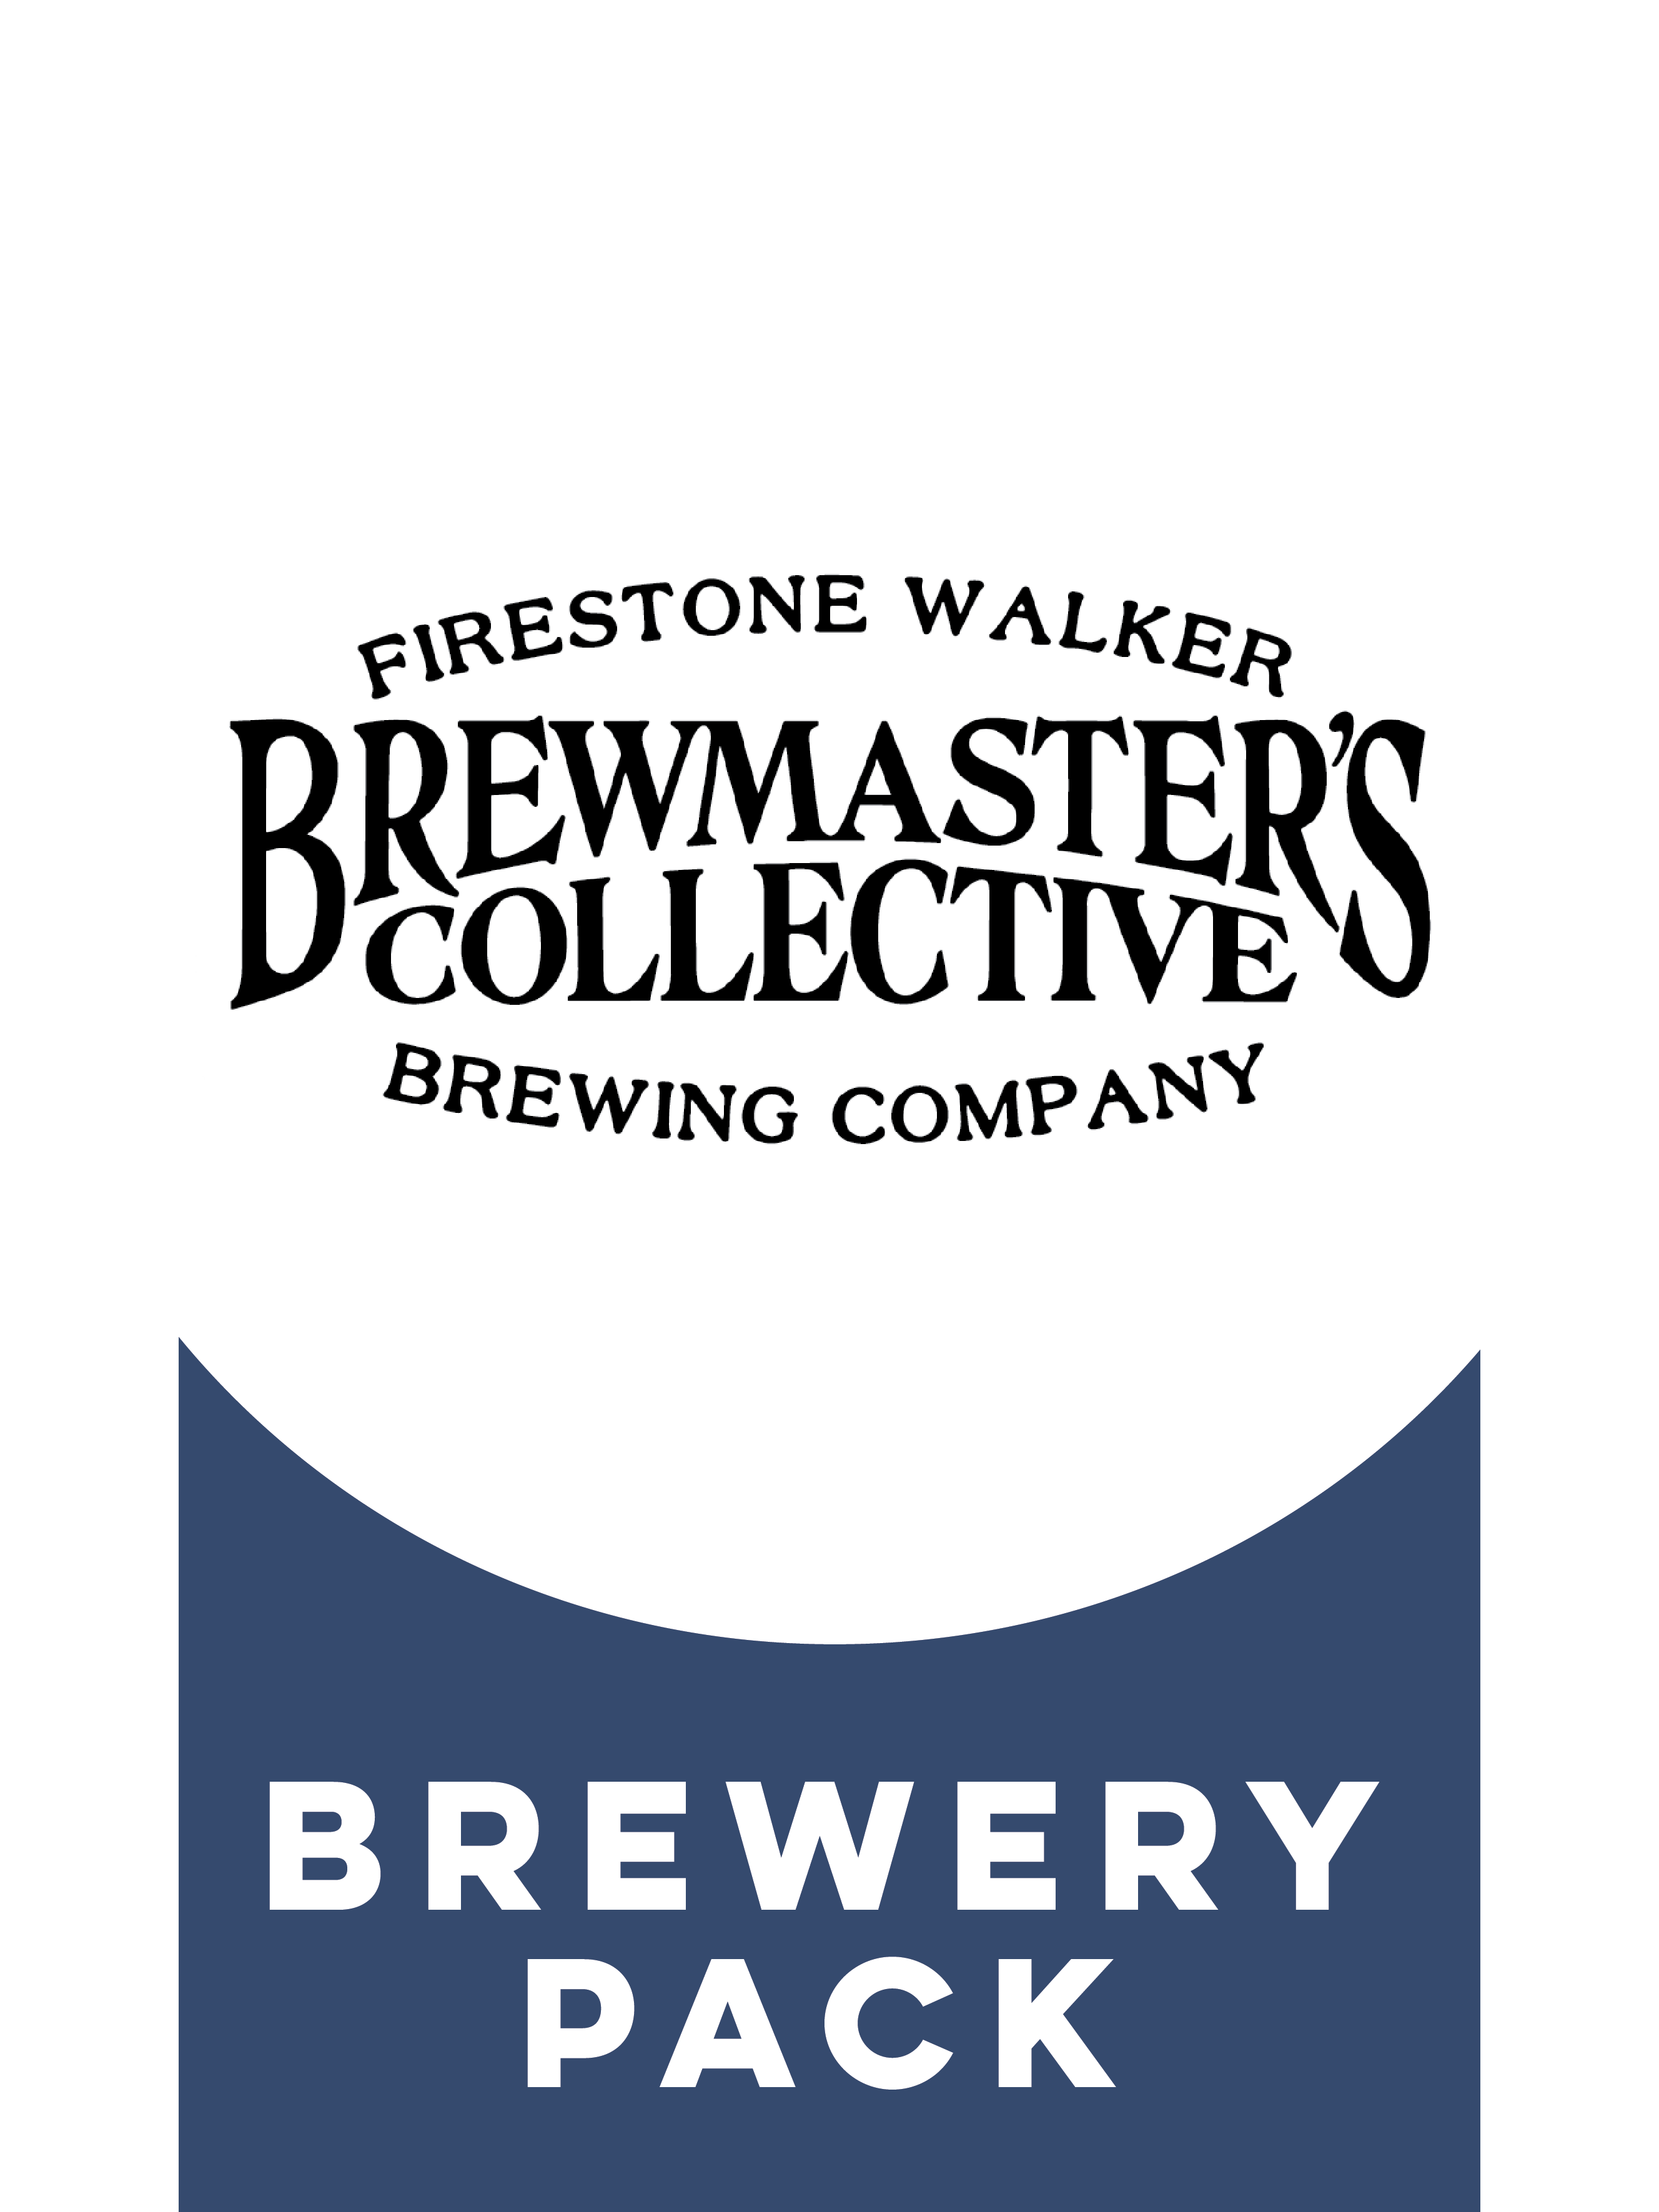 -Firestone Walker- Firestone Walker Barrel Aged Brewer's Collective Brewery Pack-Packs & Cases- Only @ Beer Republic - The best online beer store for American & Canadian craft beer - Buy beer online from the USA and Canada - Bier online kopen - Amerikaans bier kopen - Craft beer store - Craft beer kopen - Amerikanisch bier kaufen - Bier online kaufen - Acheter biere online - IPA - Stout - Porter - New England IPA - Hazy IPA - Imperial Stout - Barrel Aged - Barrel Aged Imperial Stout - Brown - Dark beer - Bl